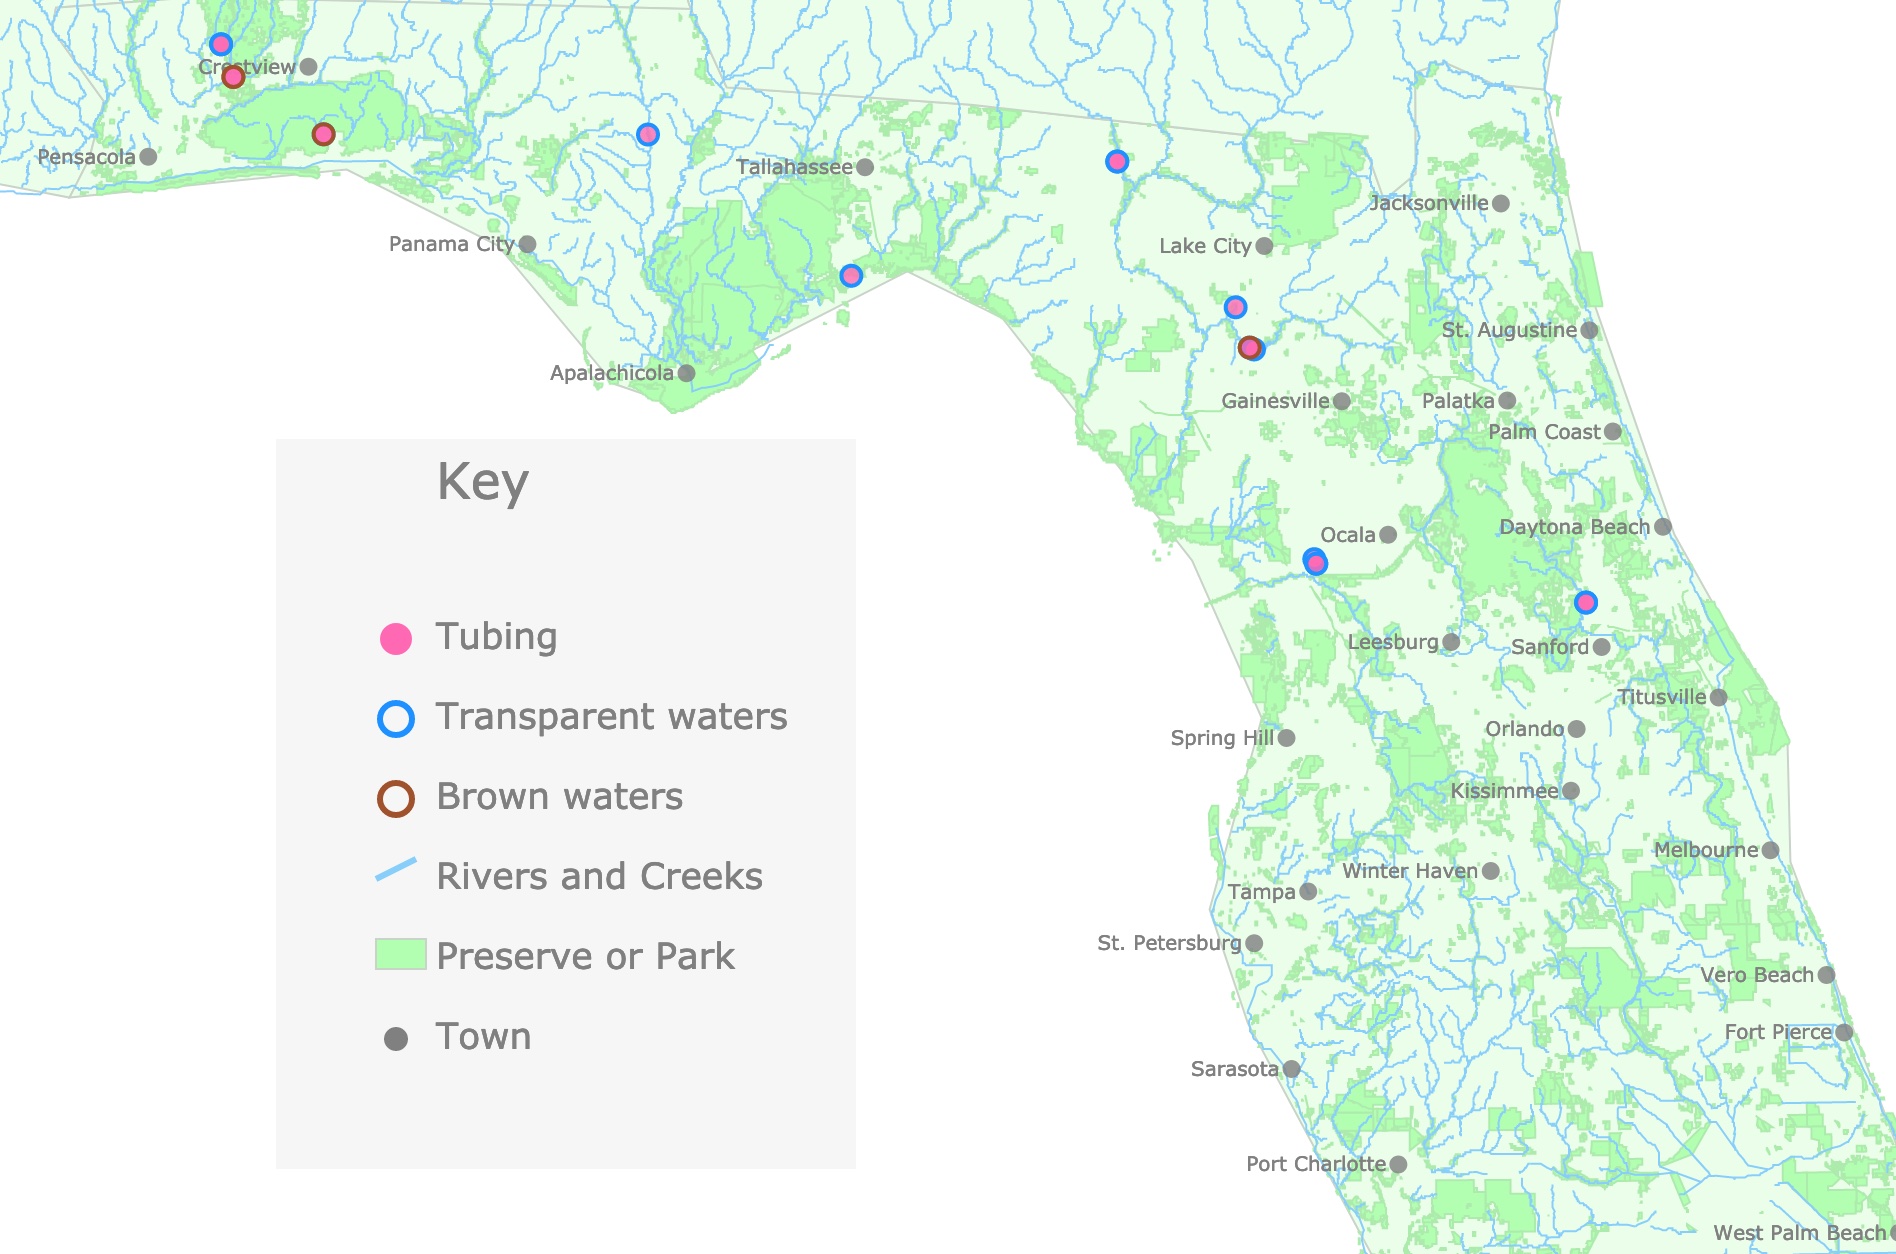 Interactive map of Florida's Lazy Rivers, Creeks, Parks and Springs.